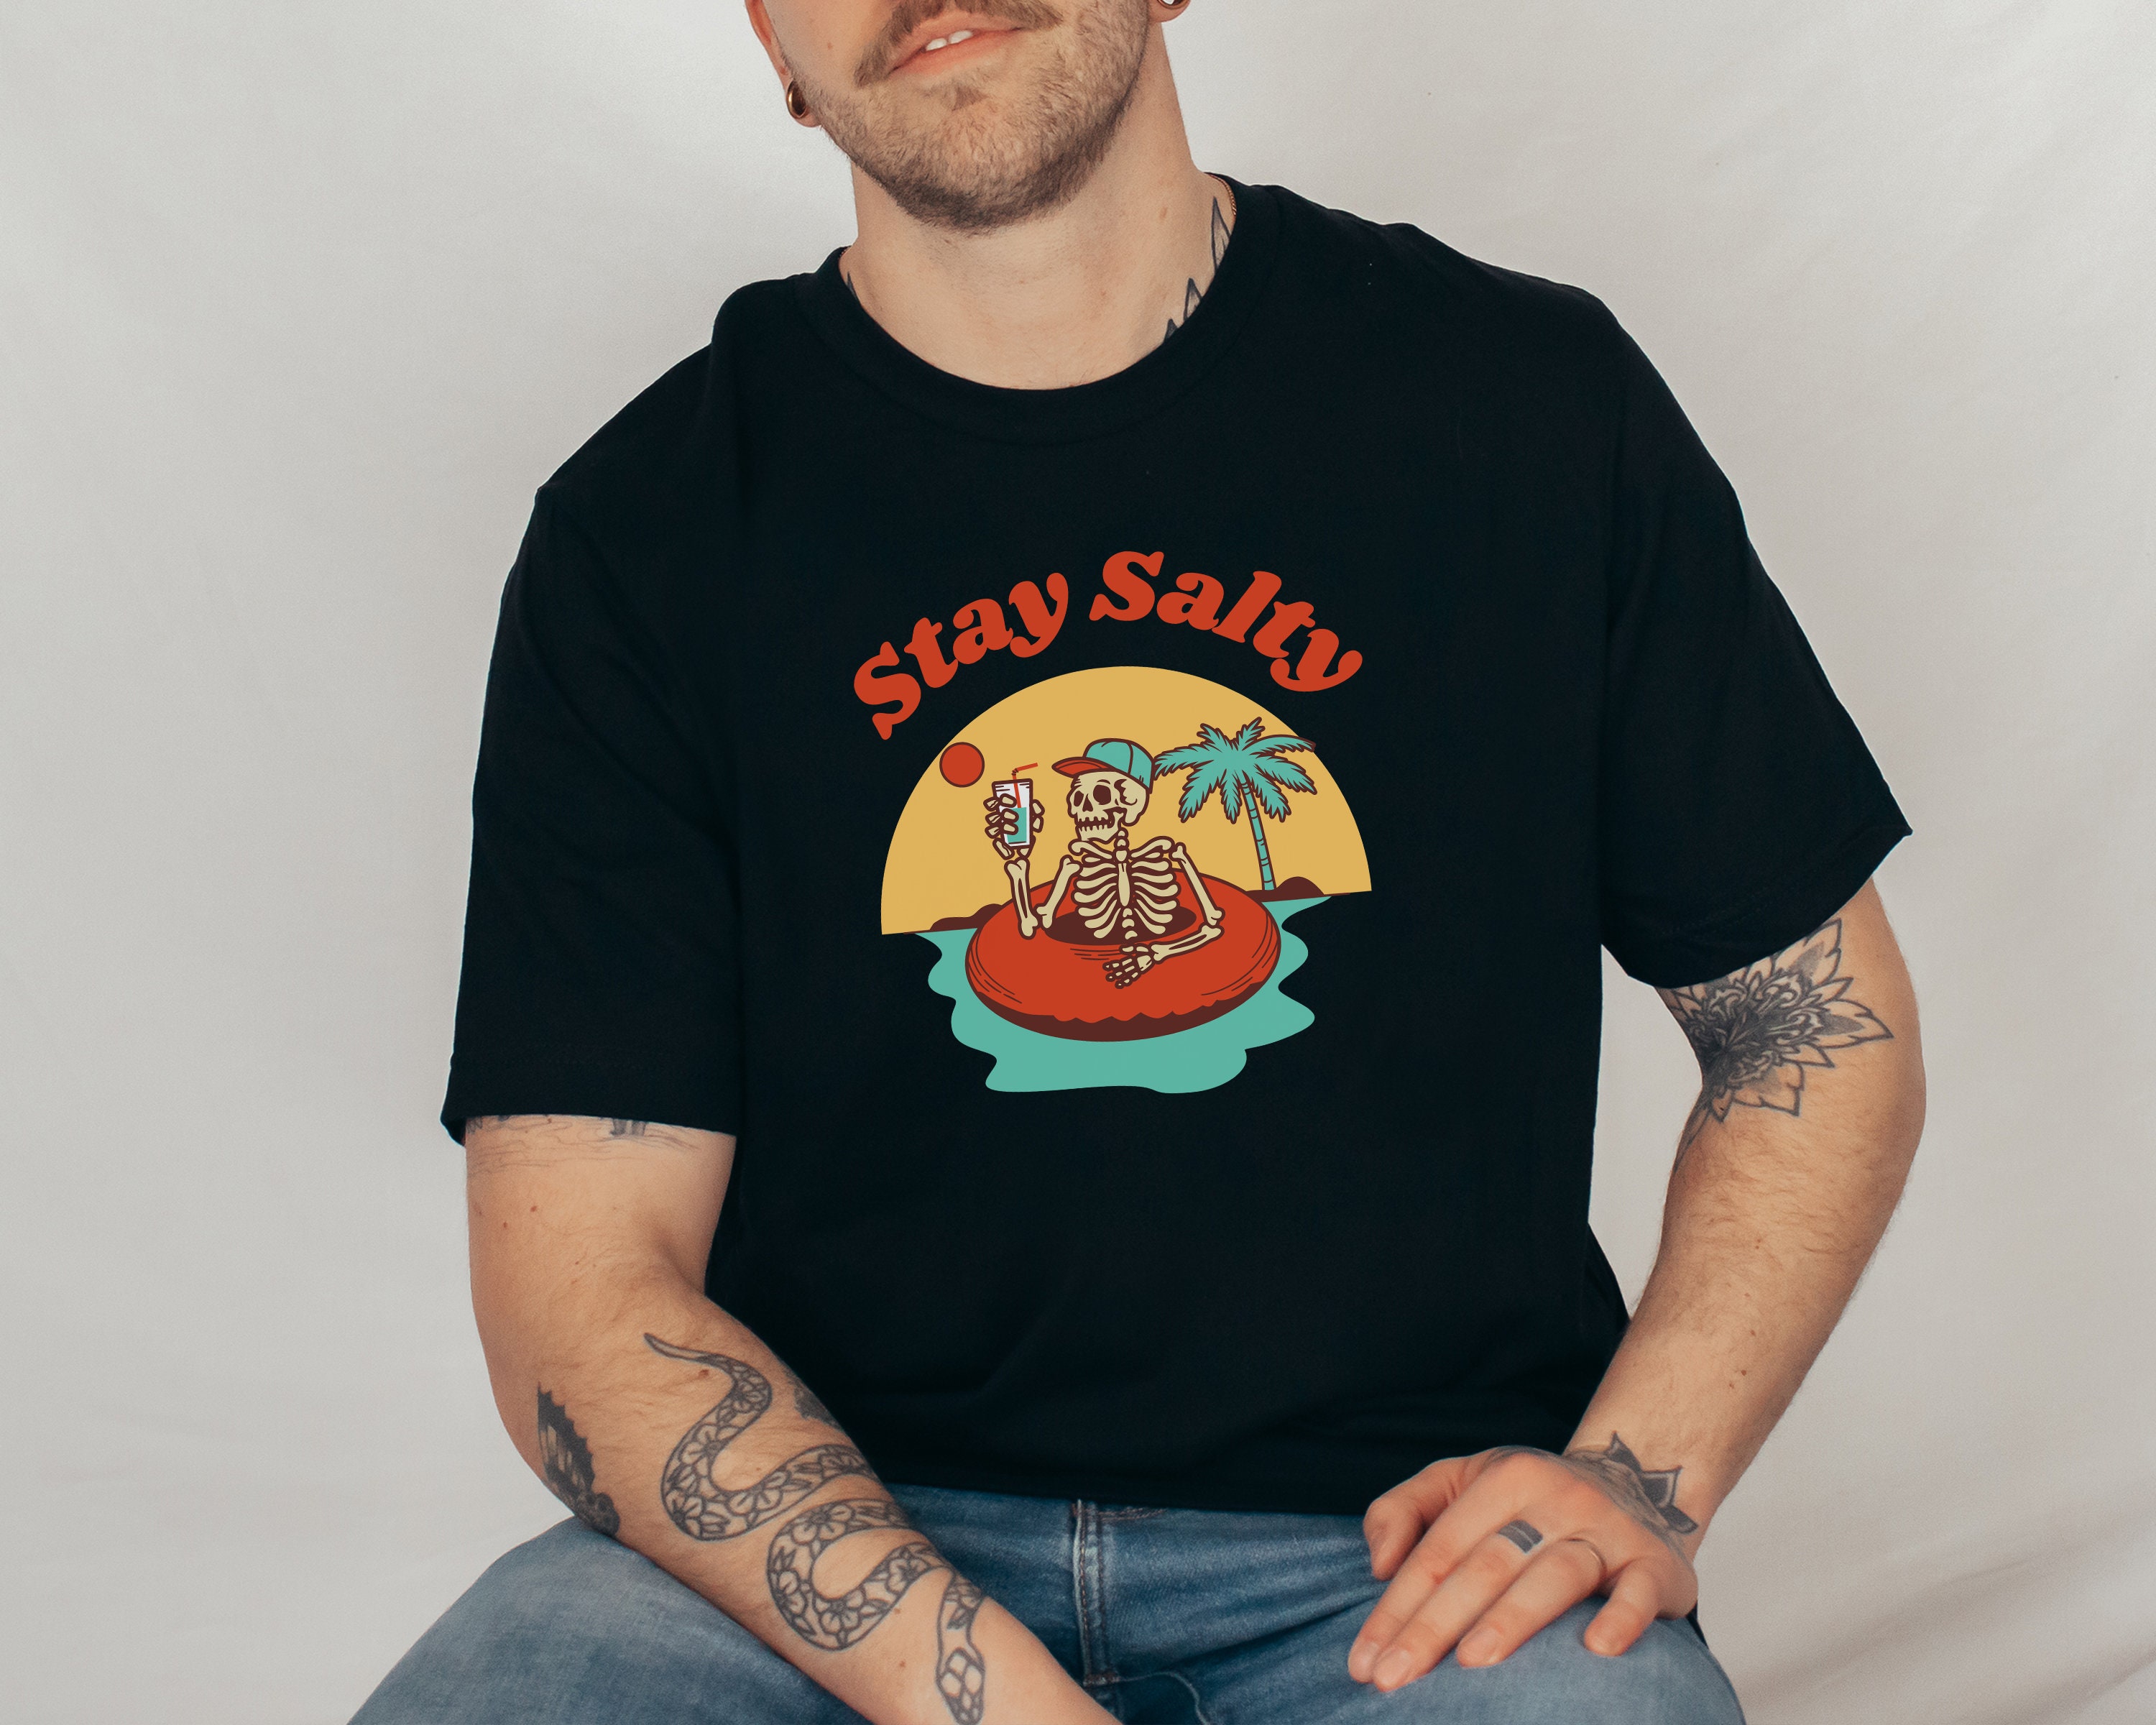 Discover Stay Salty Beach Unisex Summer Shirt, Vintage Style Tee, Summertime Vacation, Oversized Skeleton Grunge T-Shirt